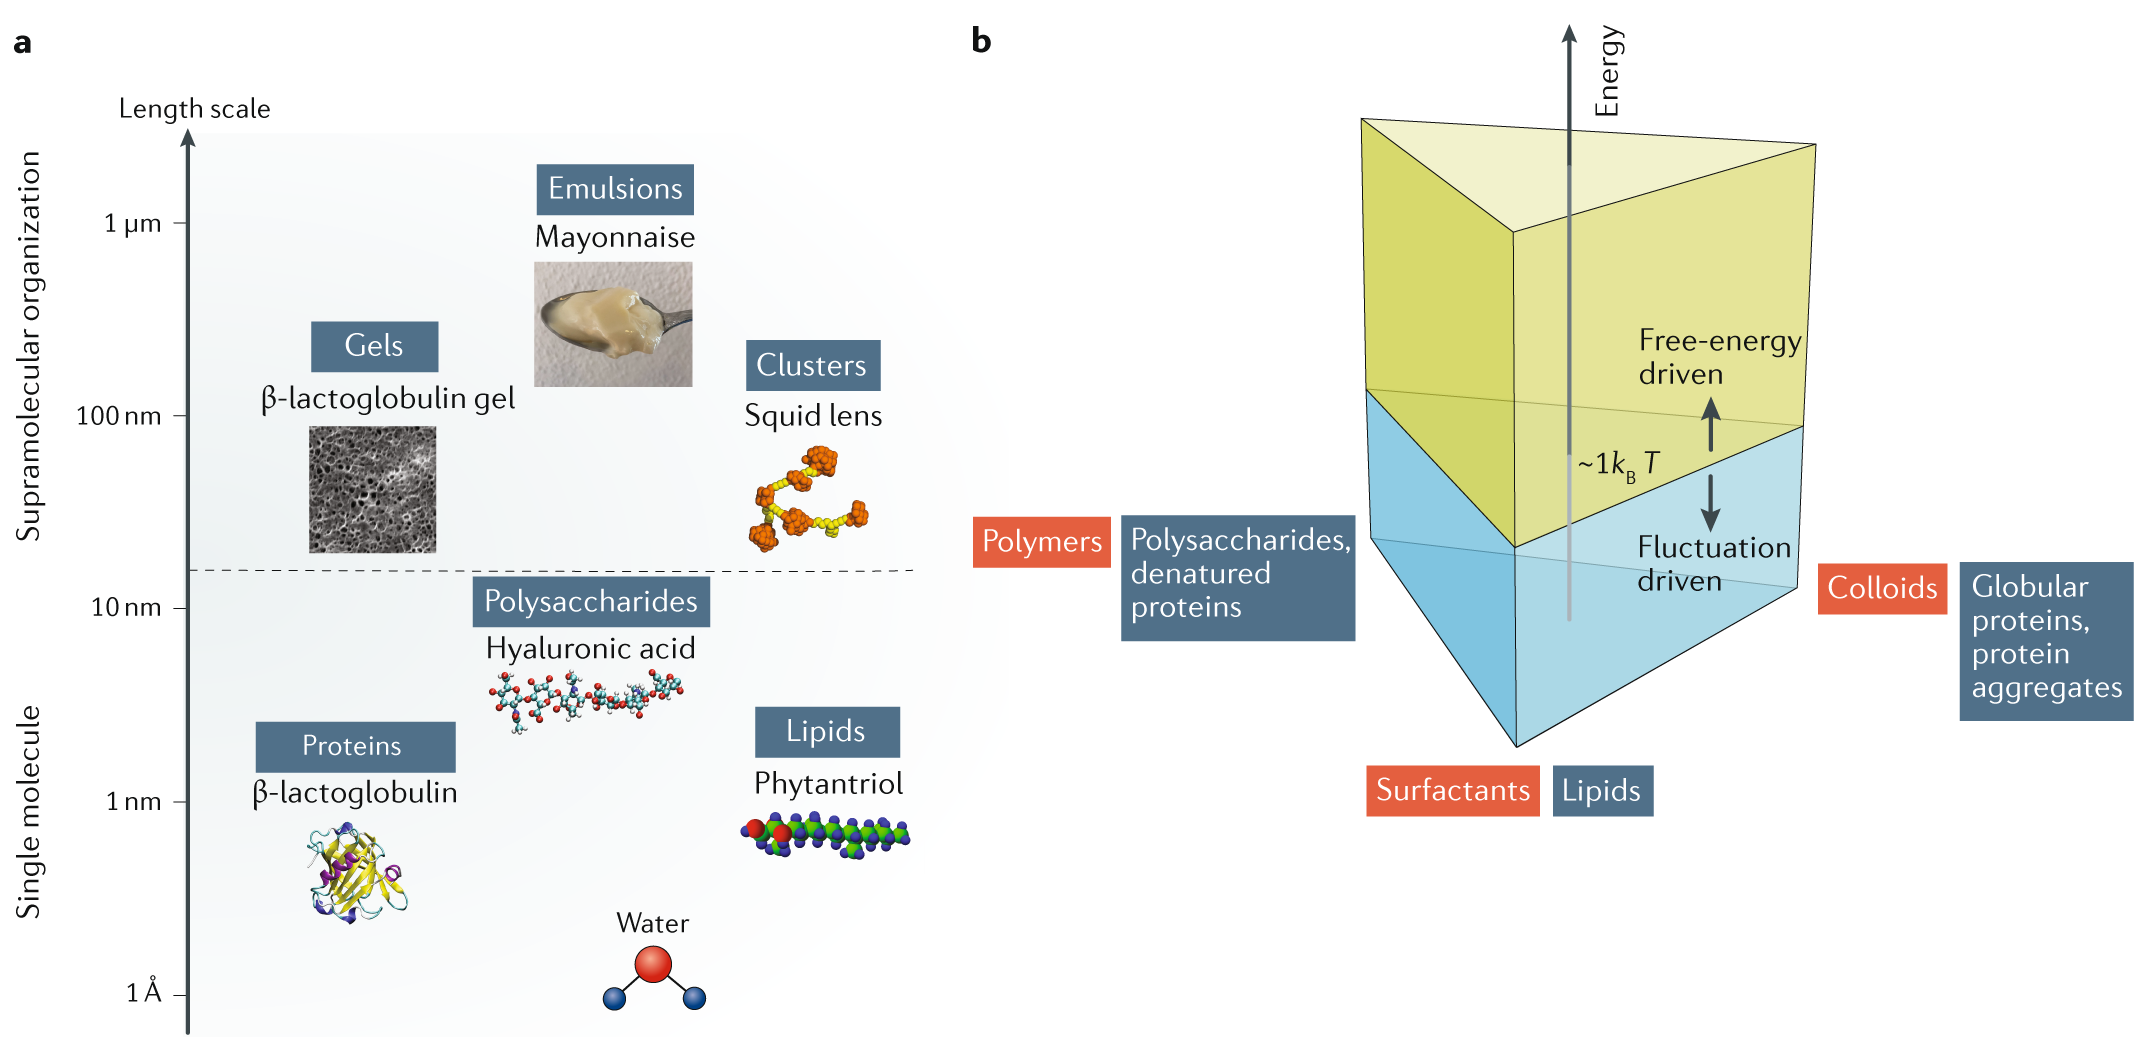 Soft condensed matter physics of foods and macronutrients | Nature Reviews  Physics